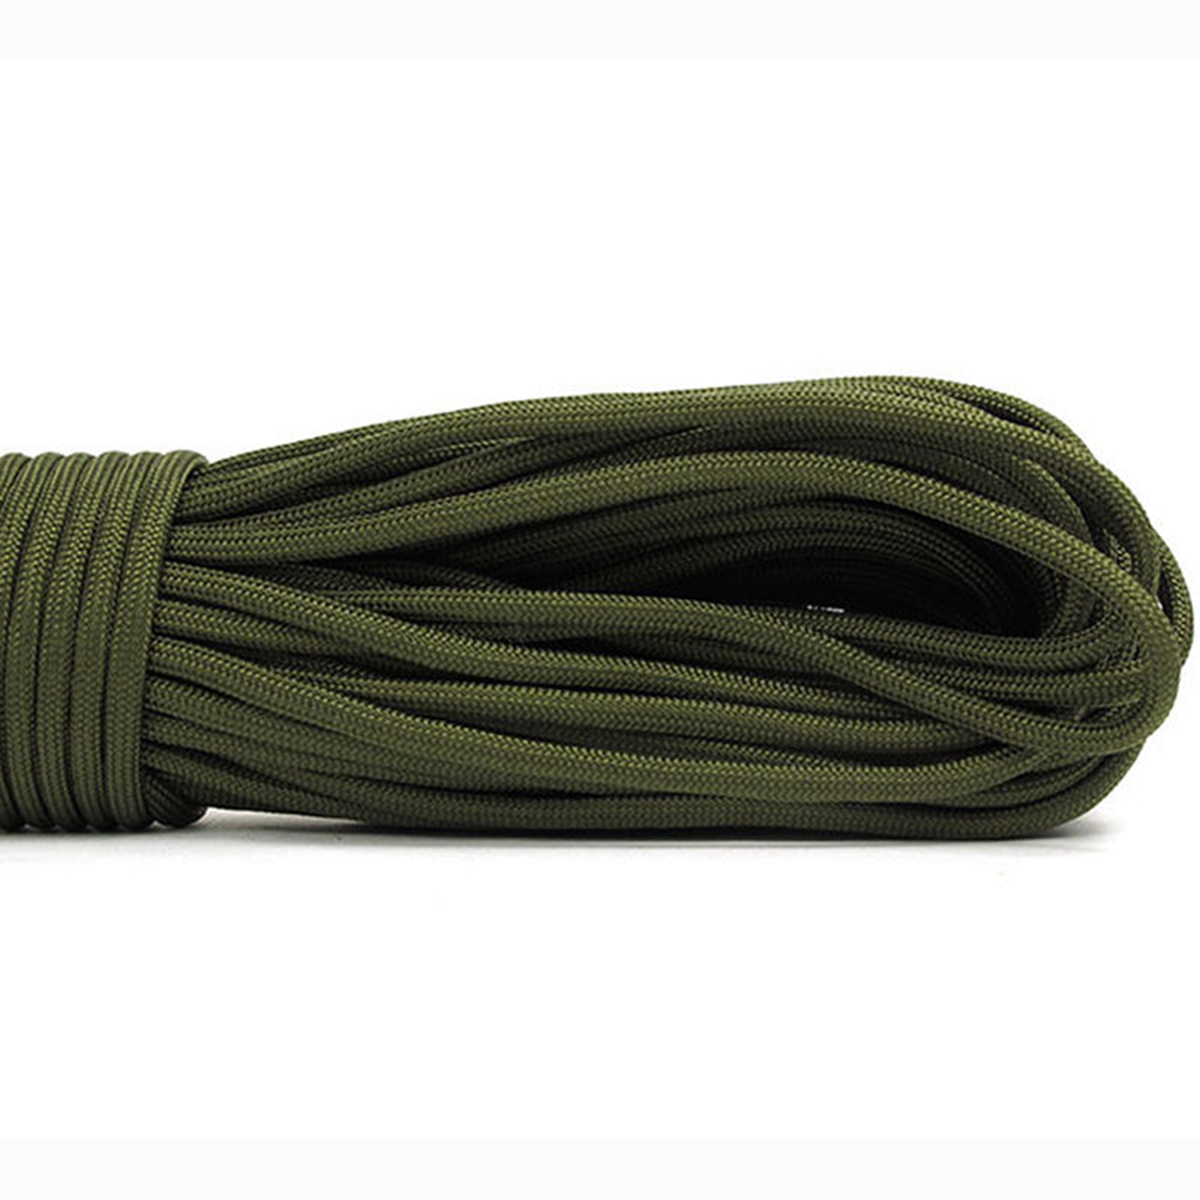 100FT30M-550lb-Paracord-Parachute-Lanyard-7-Strand-Core-Emergency-Army-Green-Rope-1222900